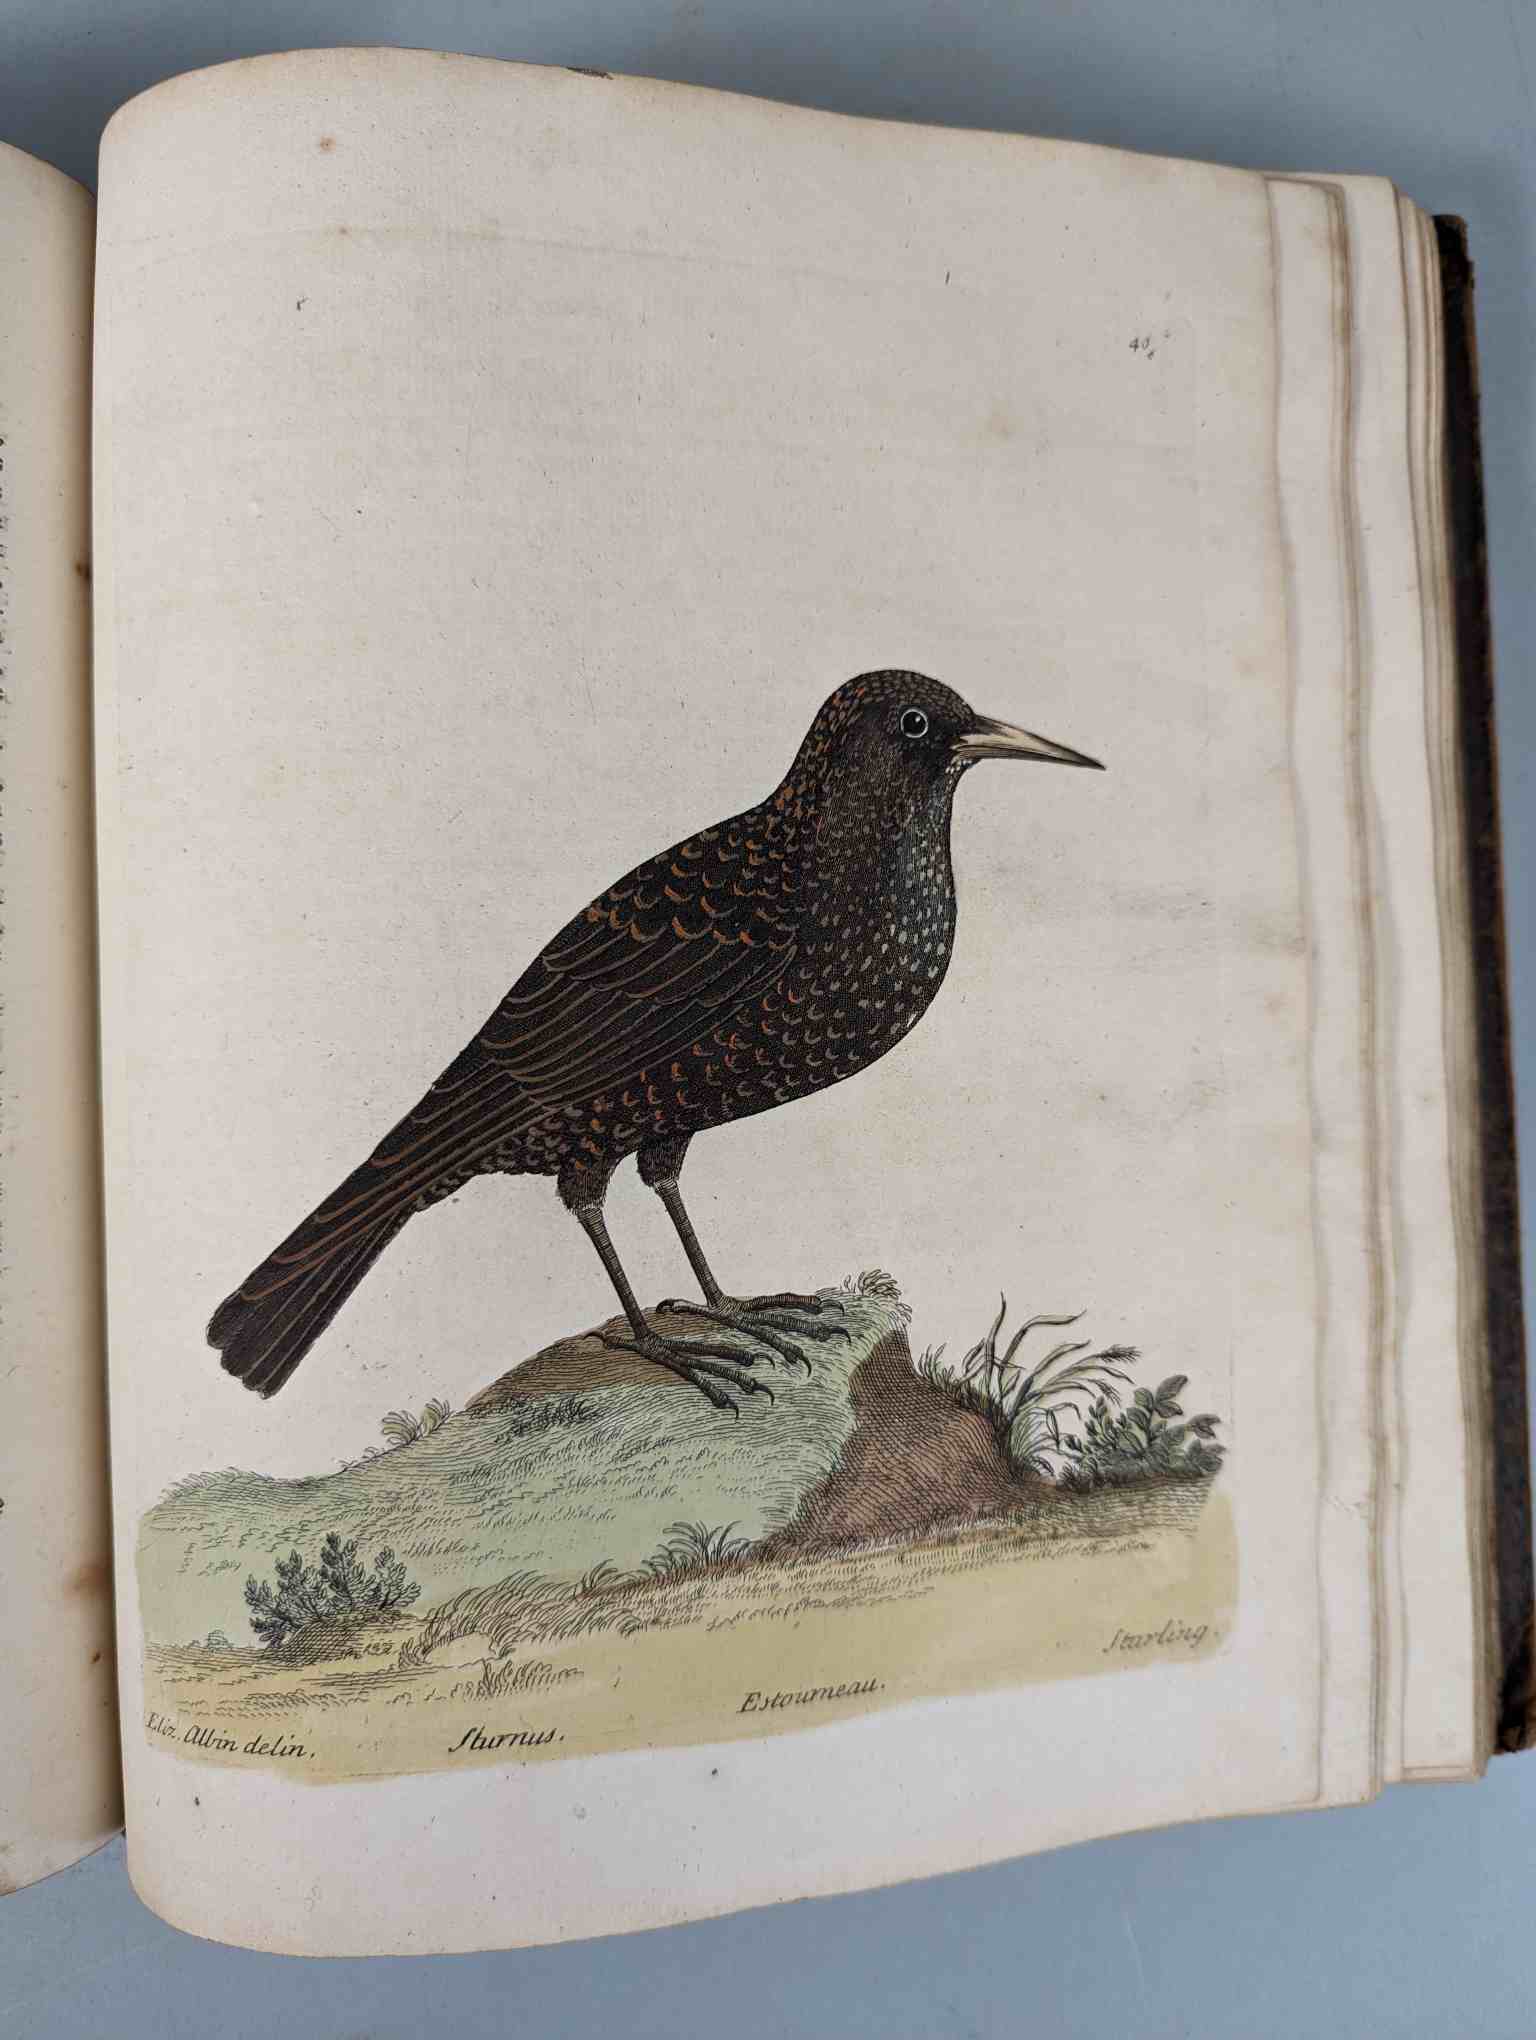 ALBIN, Eleazar. A Natural History of Birds, to which are added, Notes and Observations by W. - Image 43 of 208